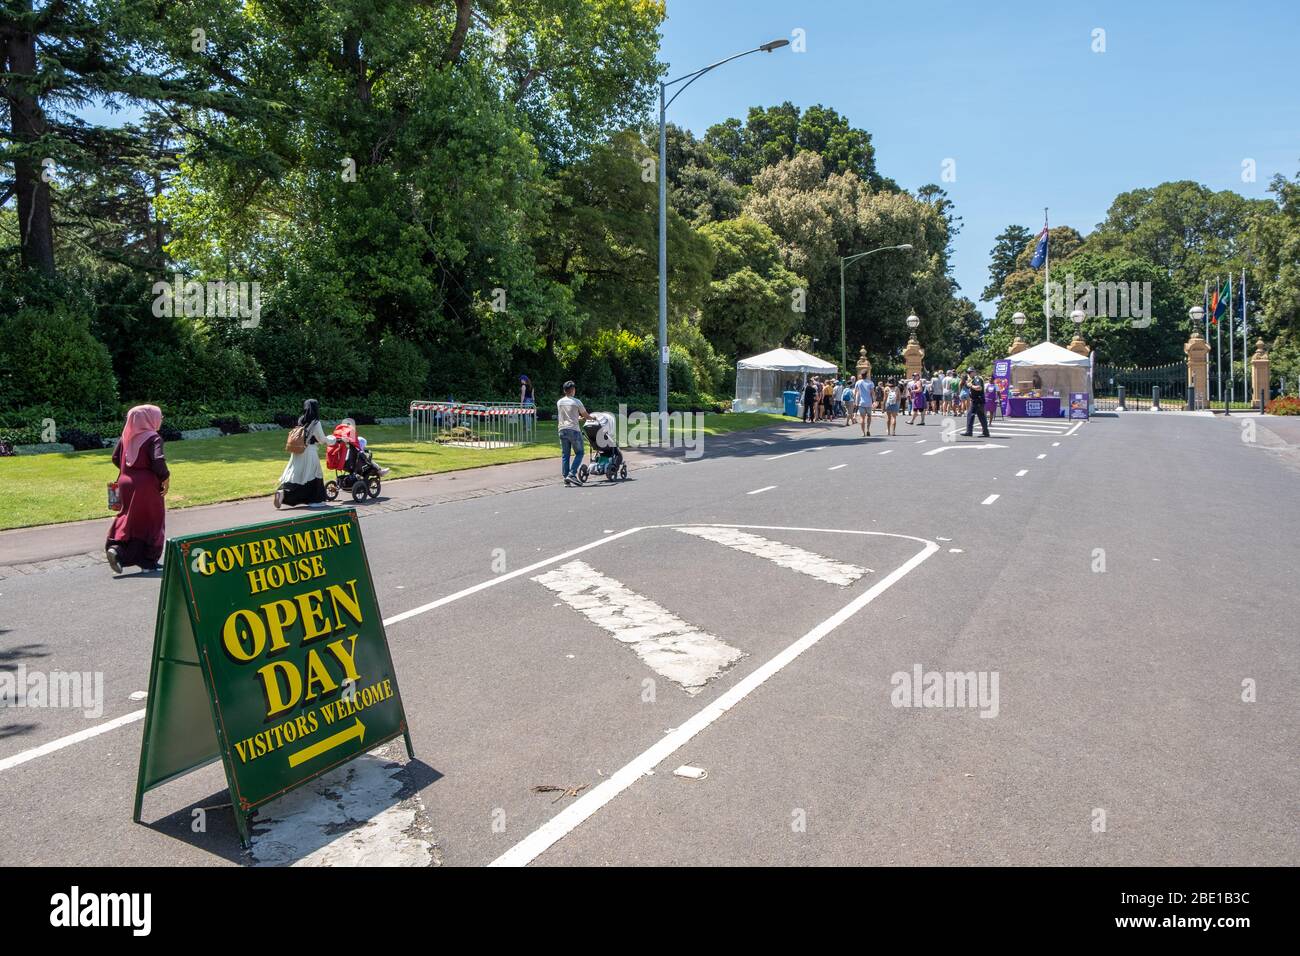 Melbourne, Australia - January 26, 2020: Government House open day sign leading visitors to the entrance Stock Photo